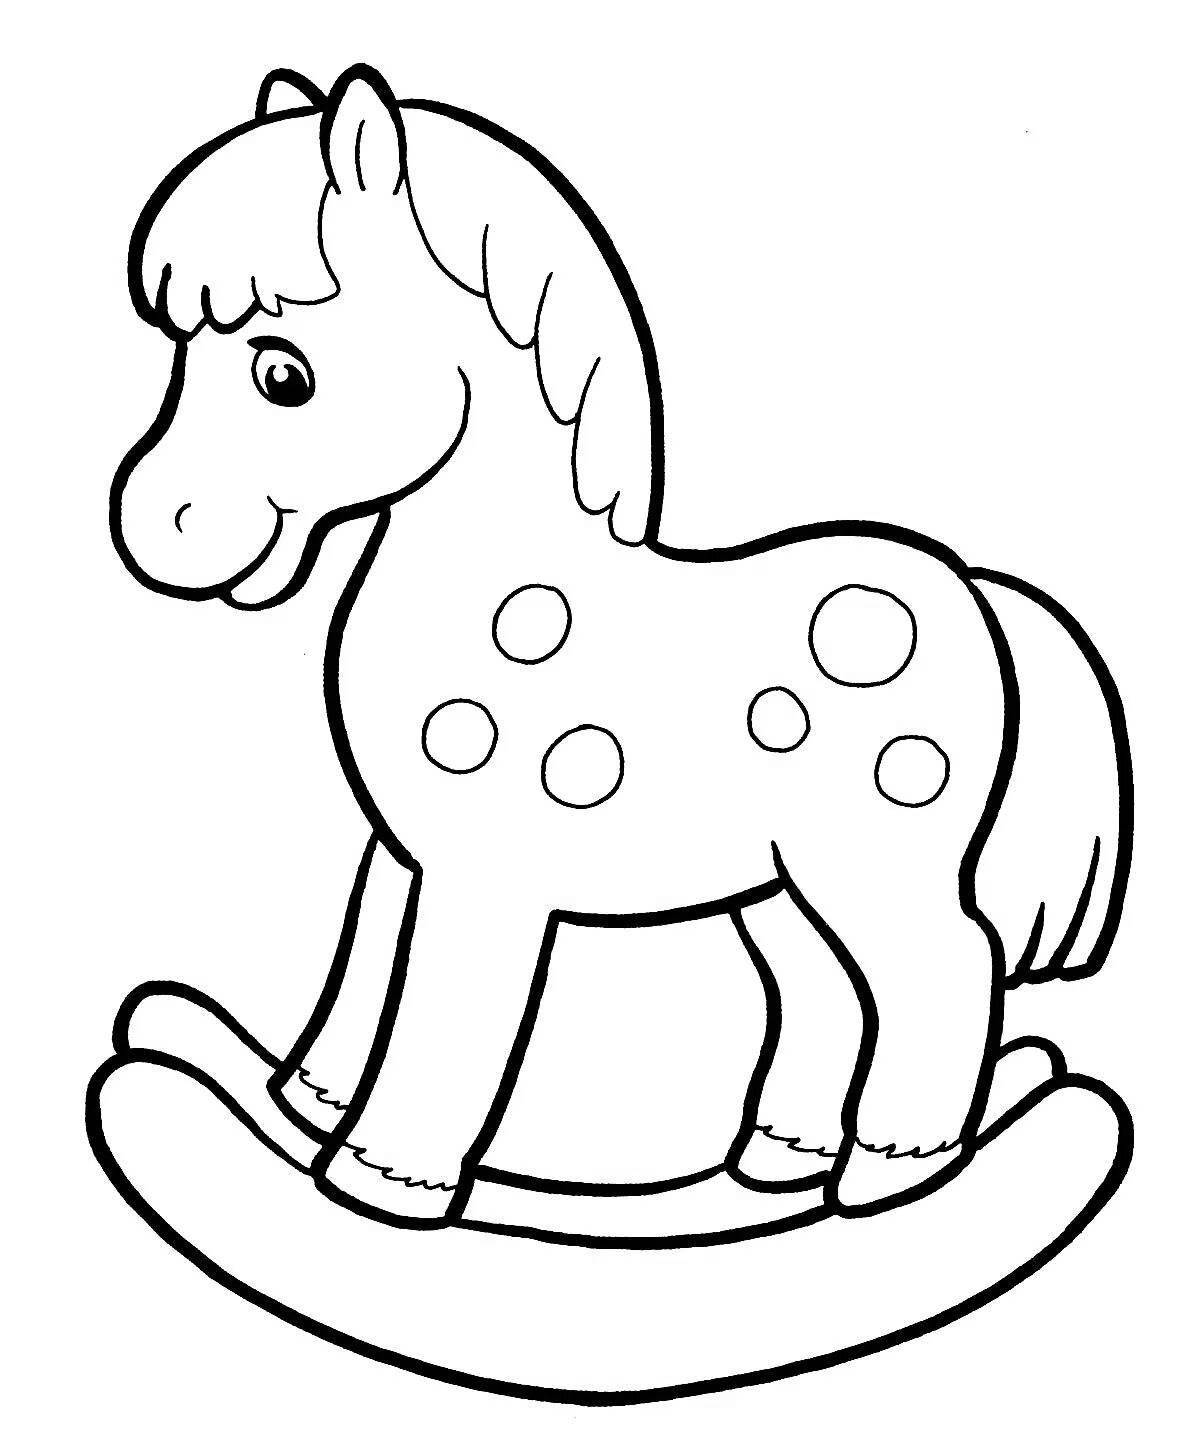 Coloring rocking horse for kids